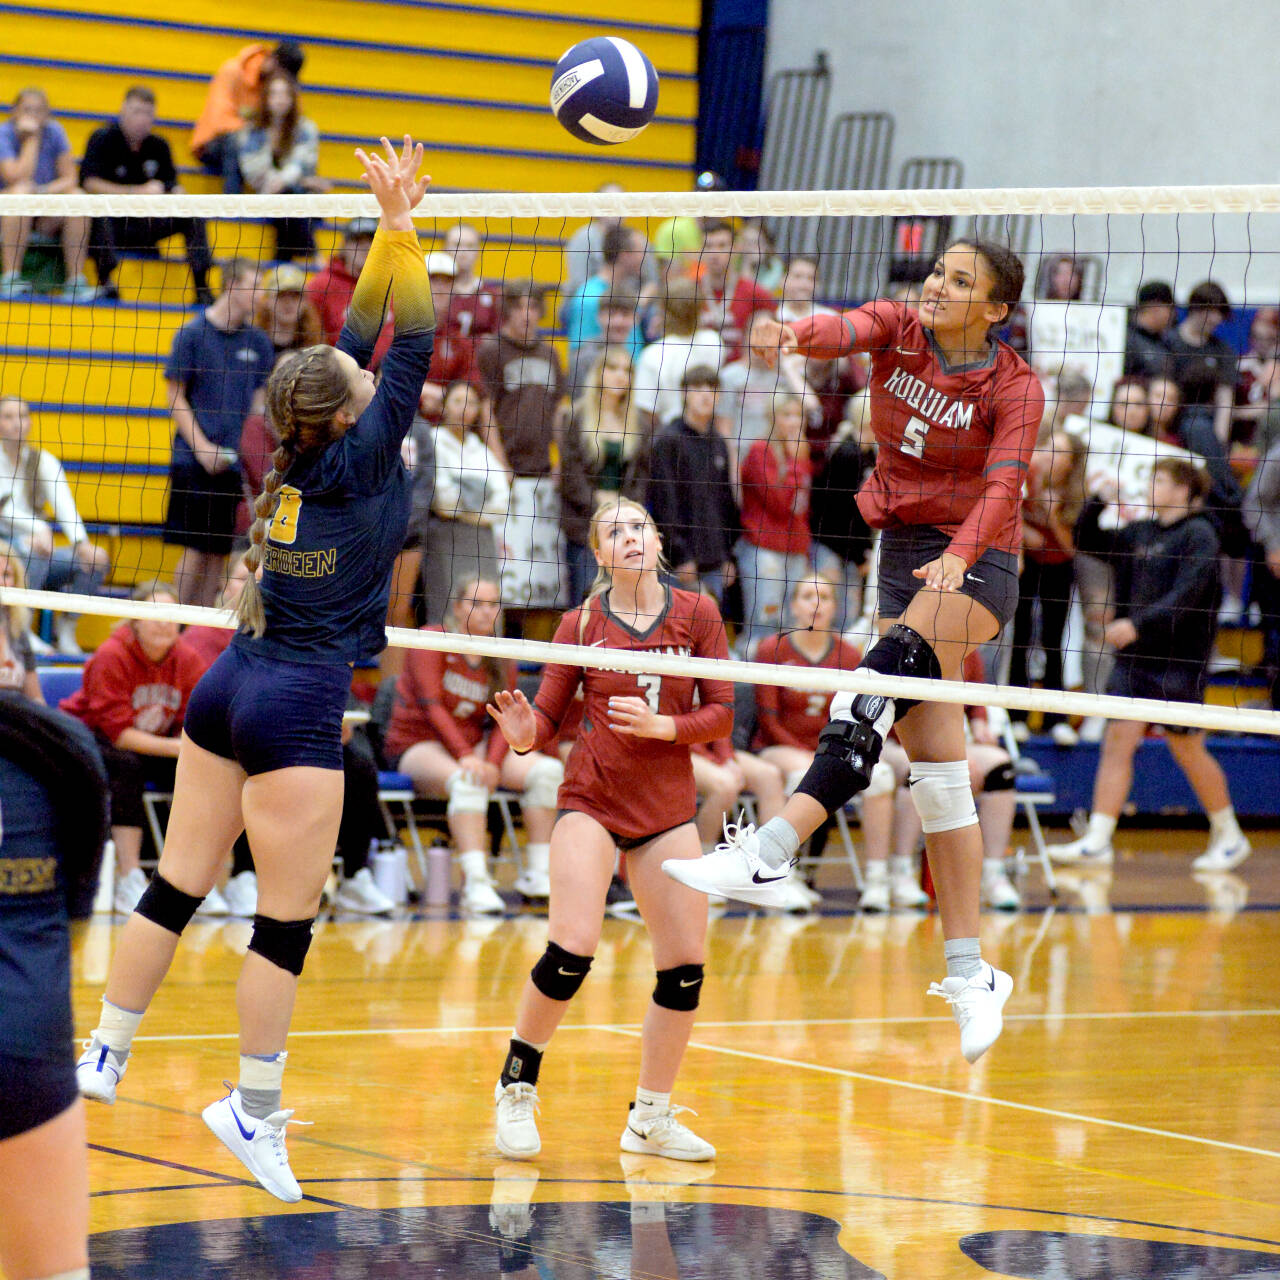 RYAN SPARKS | THE DAILY WORLD Hoquiam’s Chloe Kennedy (5) attempts a kill against Aberdeen’s Kailey Pendergrass (8) during the Grizzlies’ straight-set victory on Tuesday, Sept. 13, 2022 in Aberdeen.